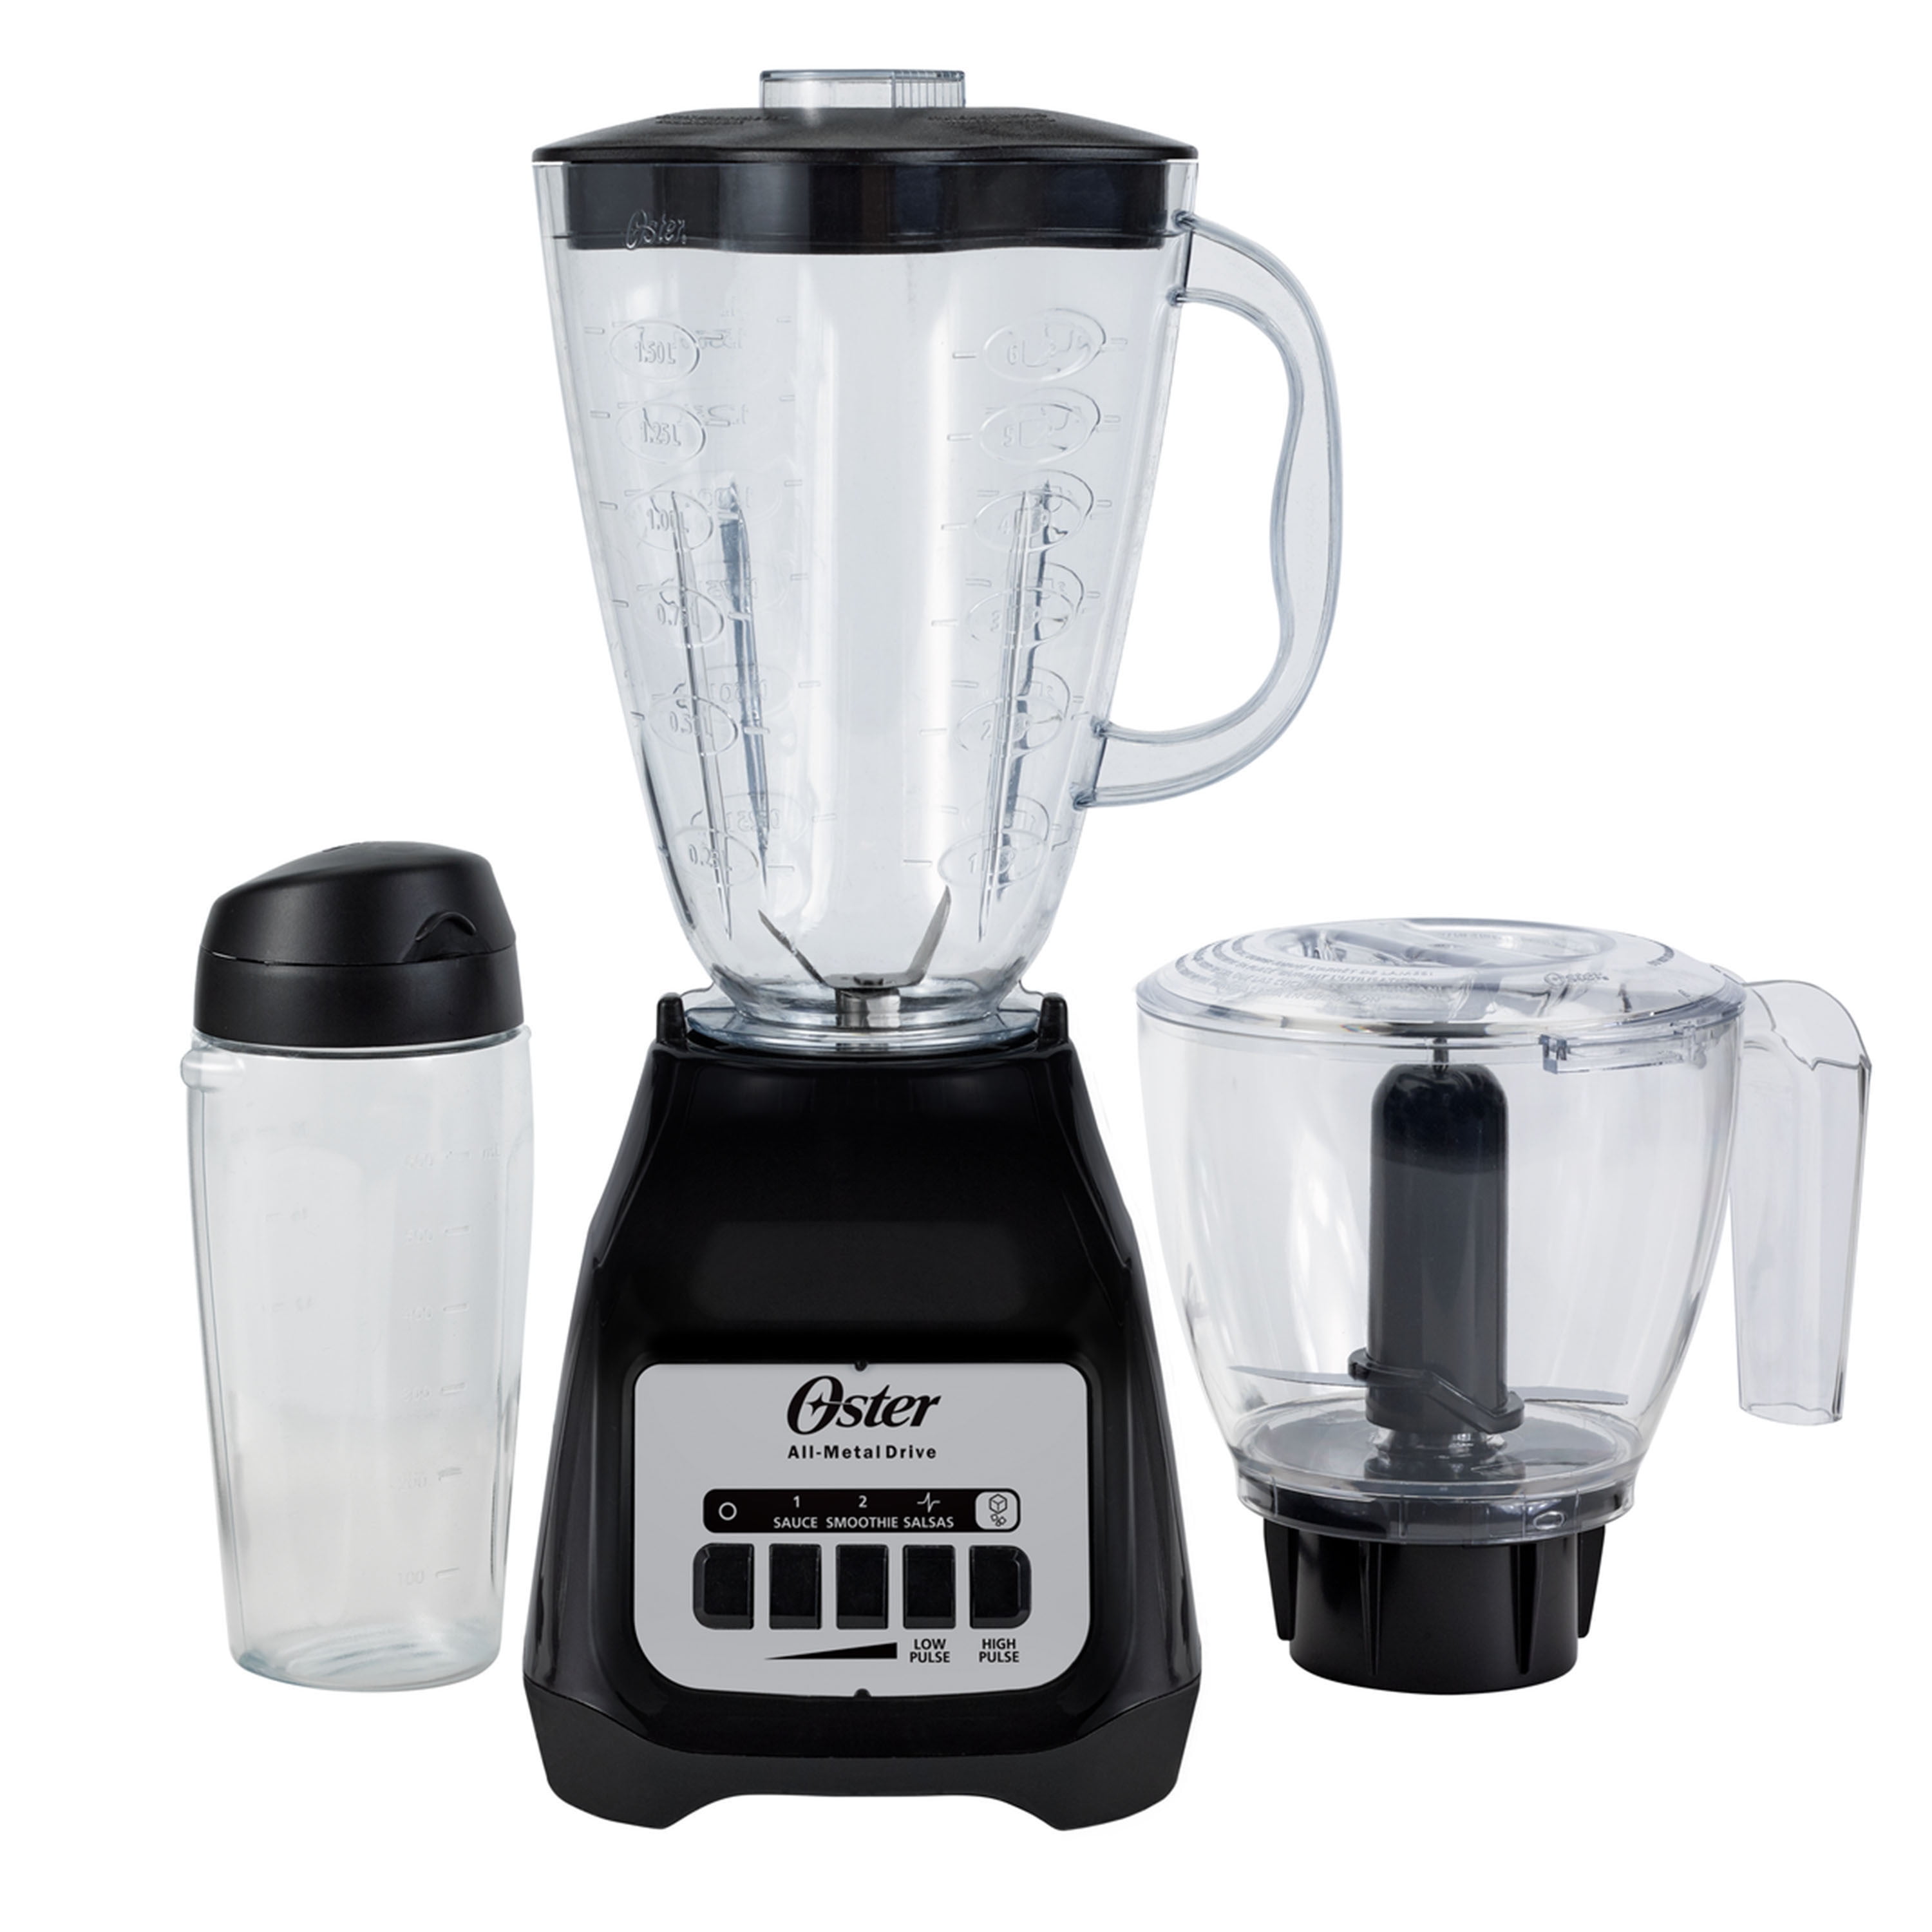  Oster Blender and Food Processor Combo with 3 Settings for  Smoothies, Shakes, and Food Chopping, Includes 2 24-Ounce Cups and Lids,  Carbon Grey